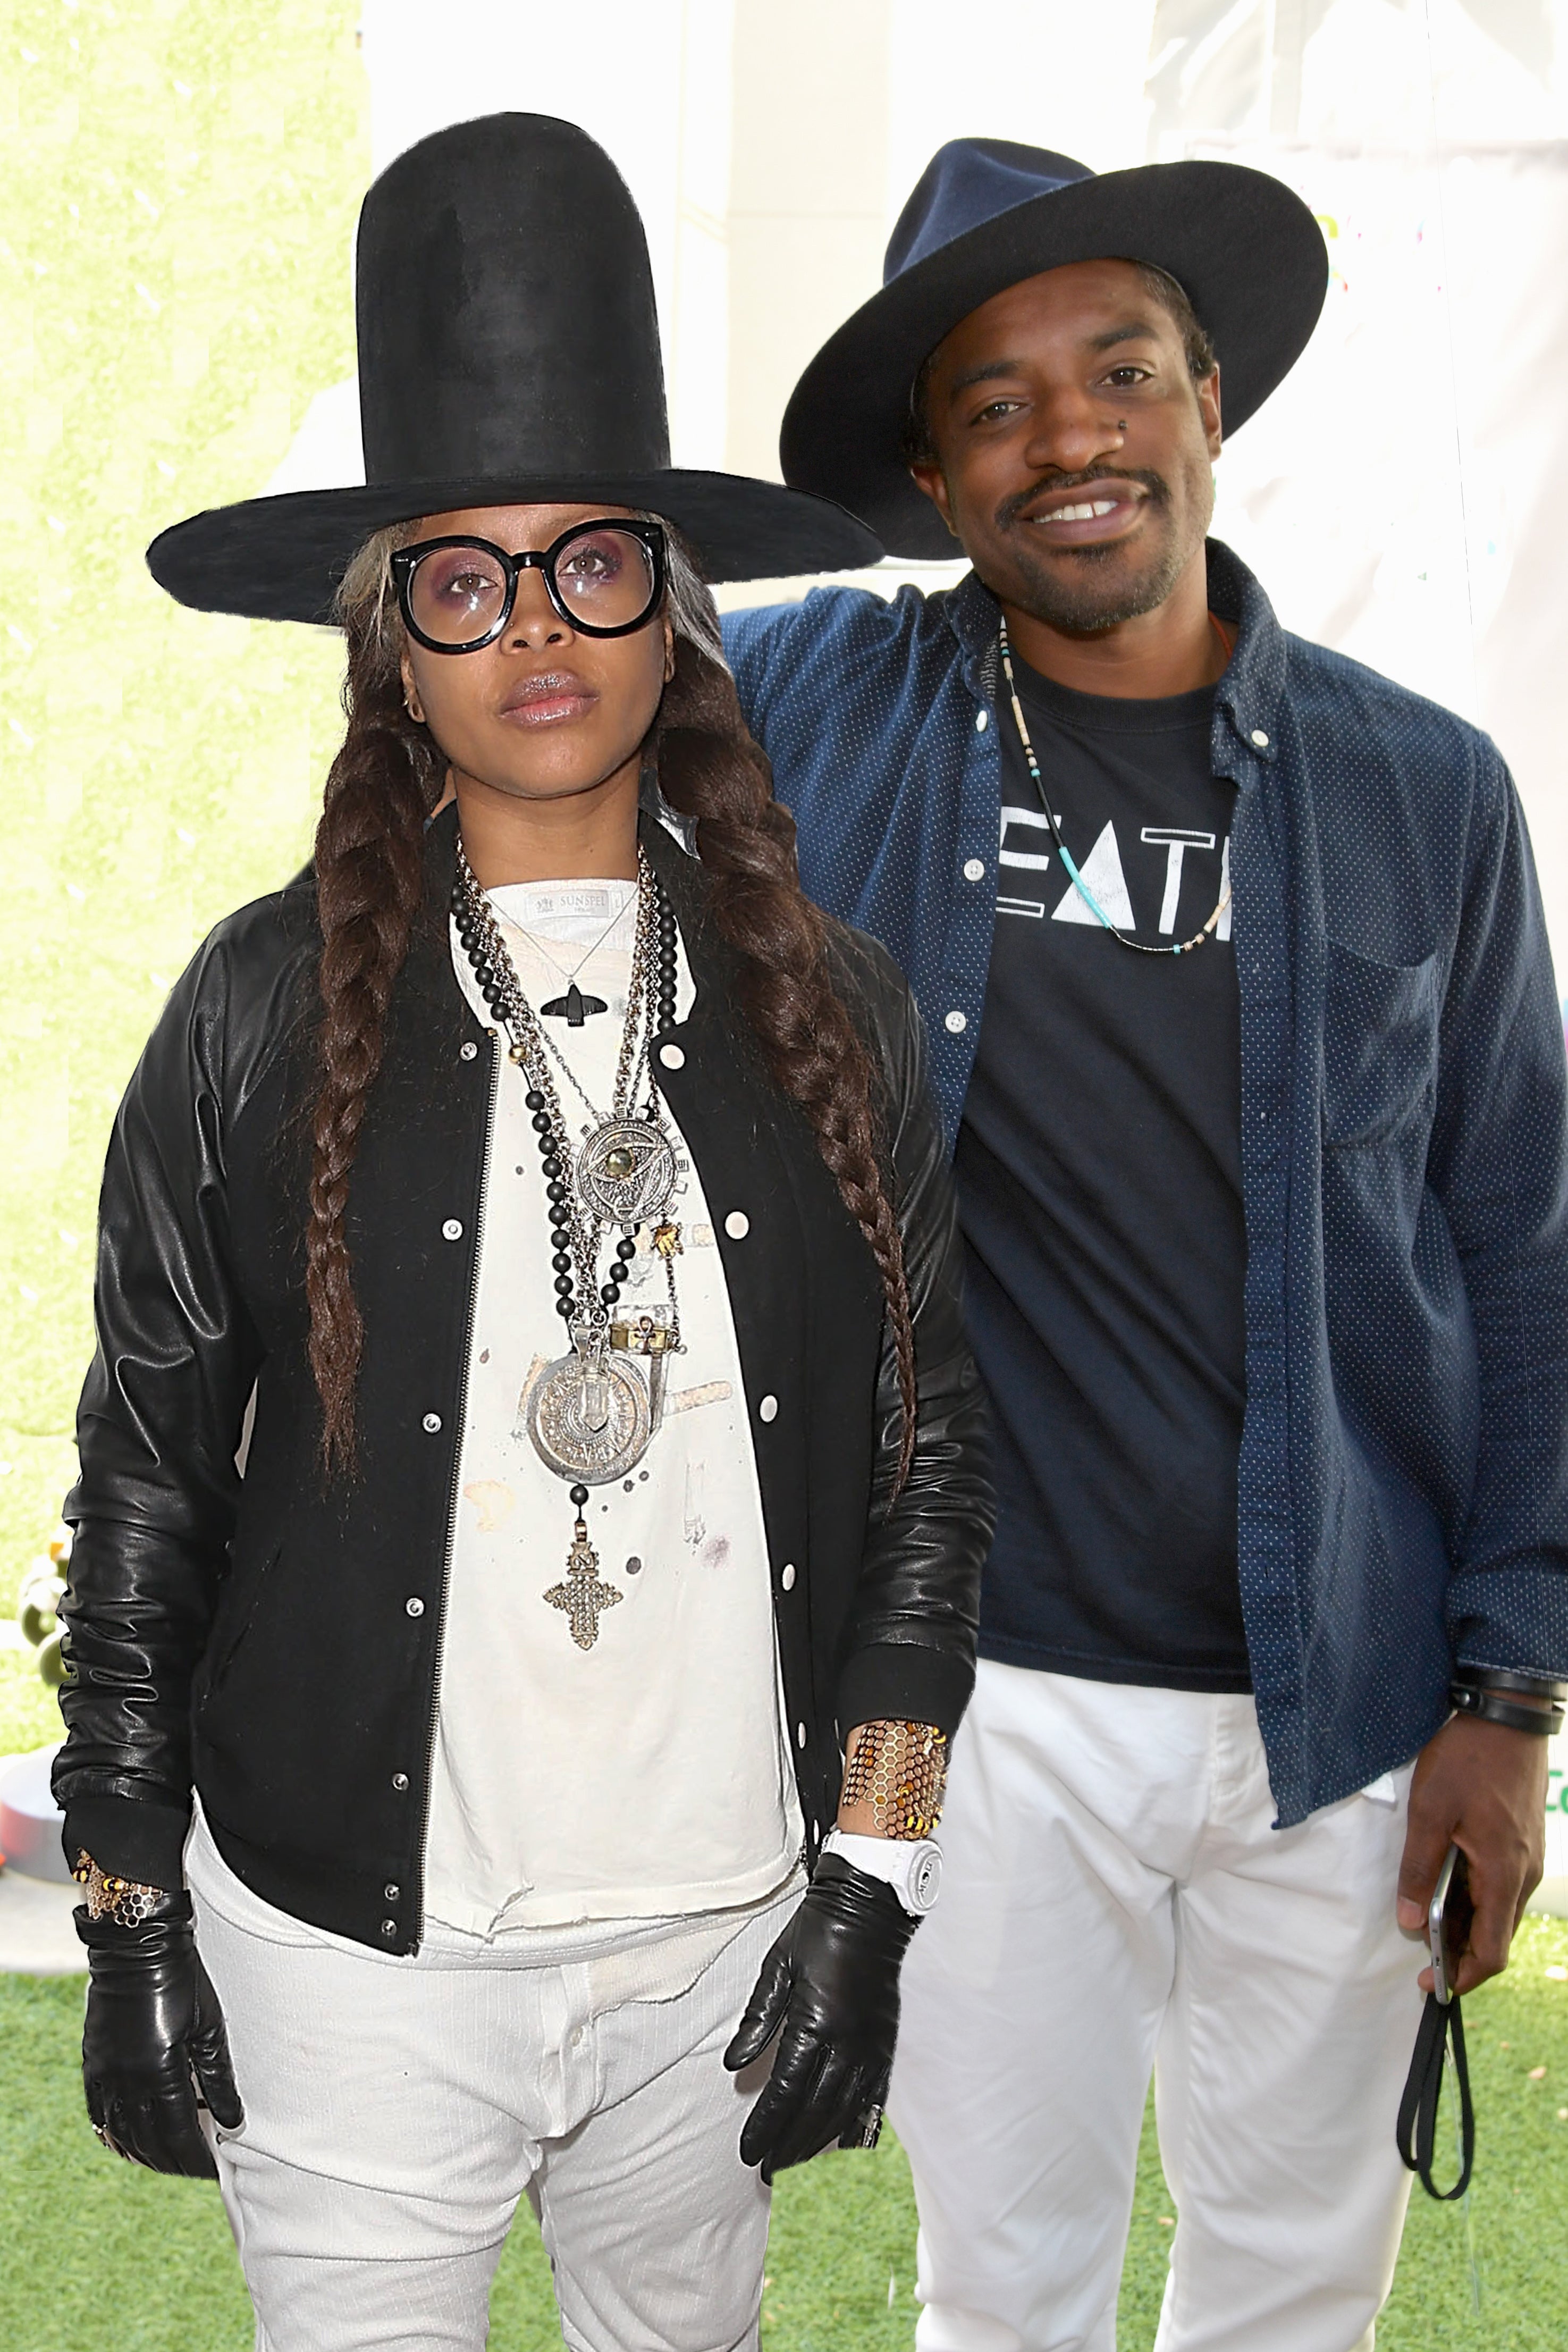 Erykah Badu And Andre 3000 Shared The Sweetest Selfie With Their Son Seven For Father’s Day